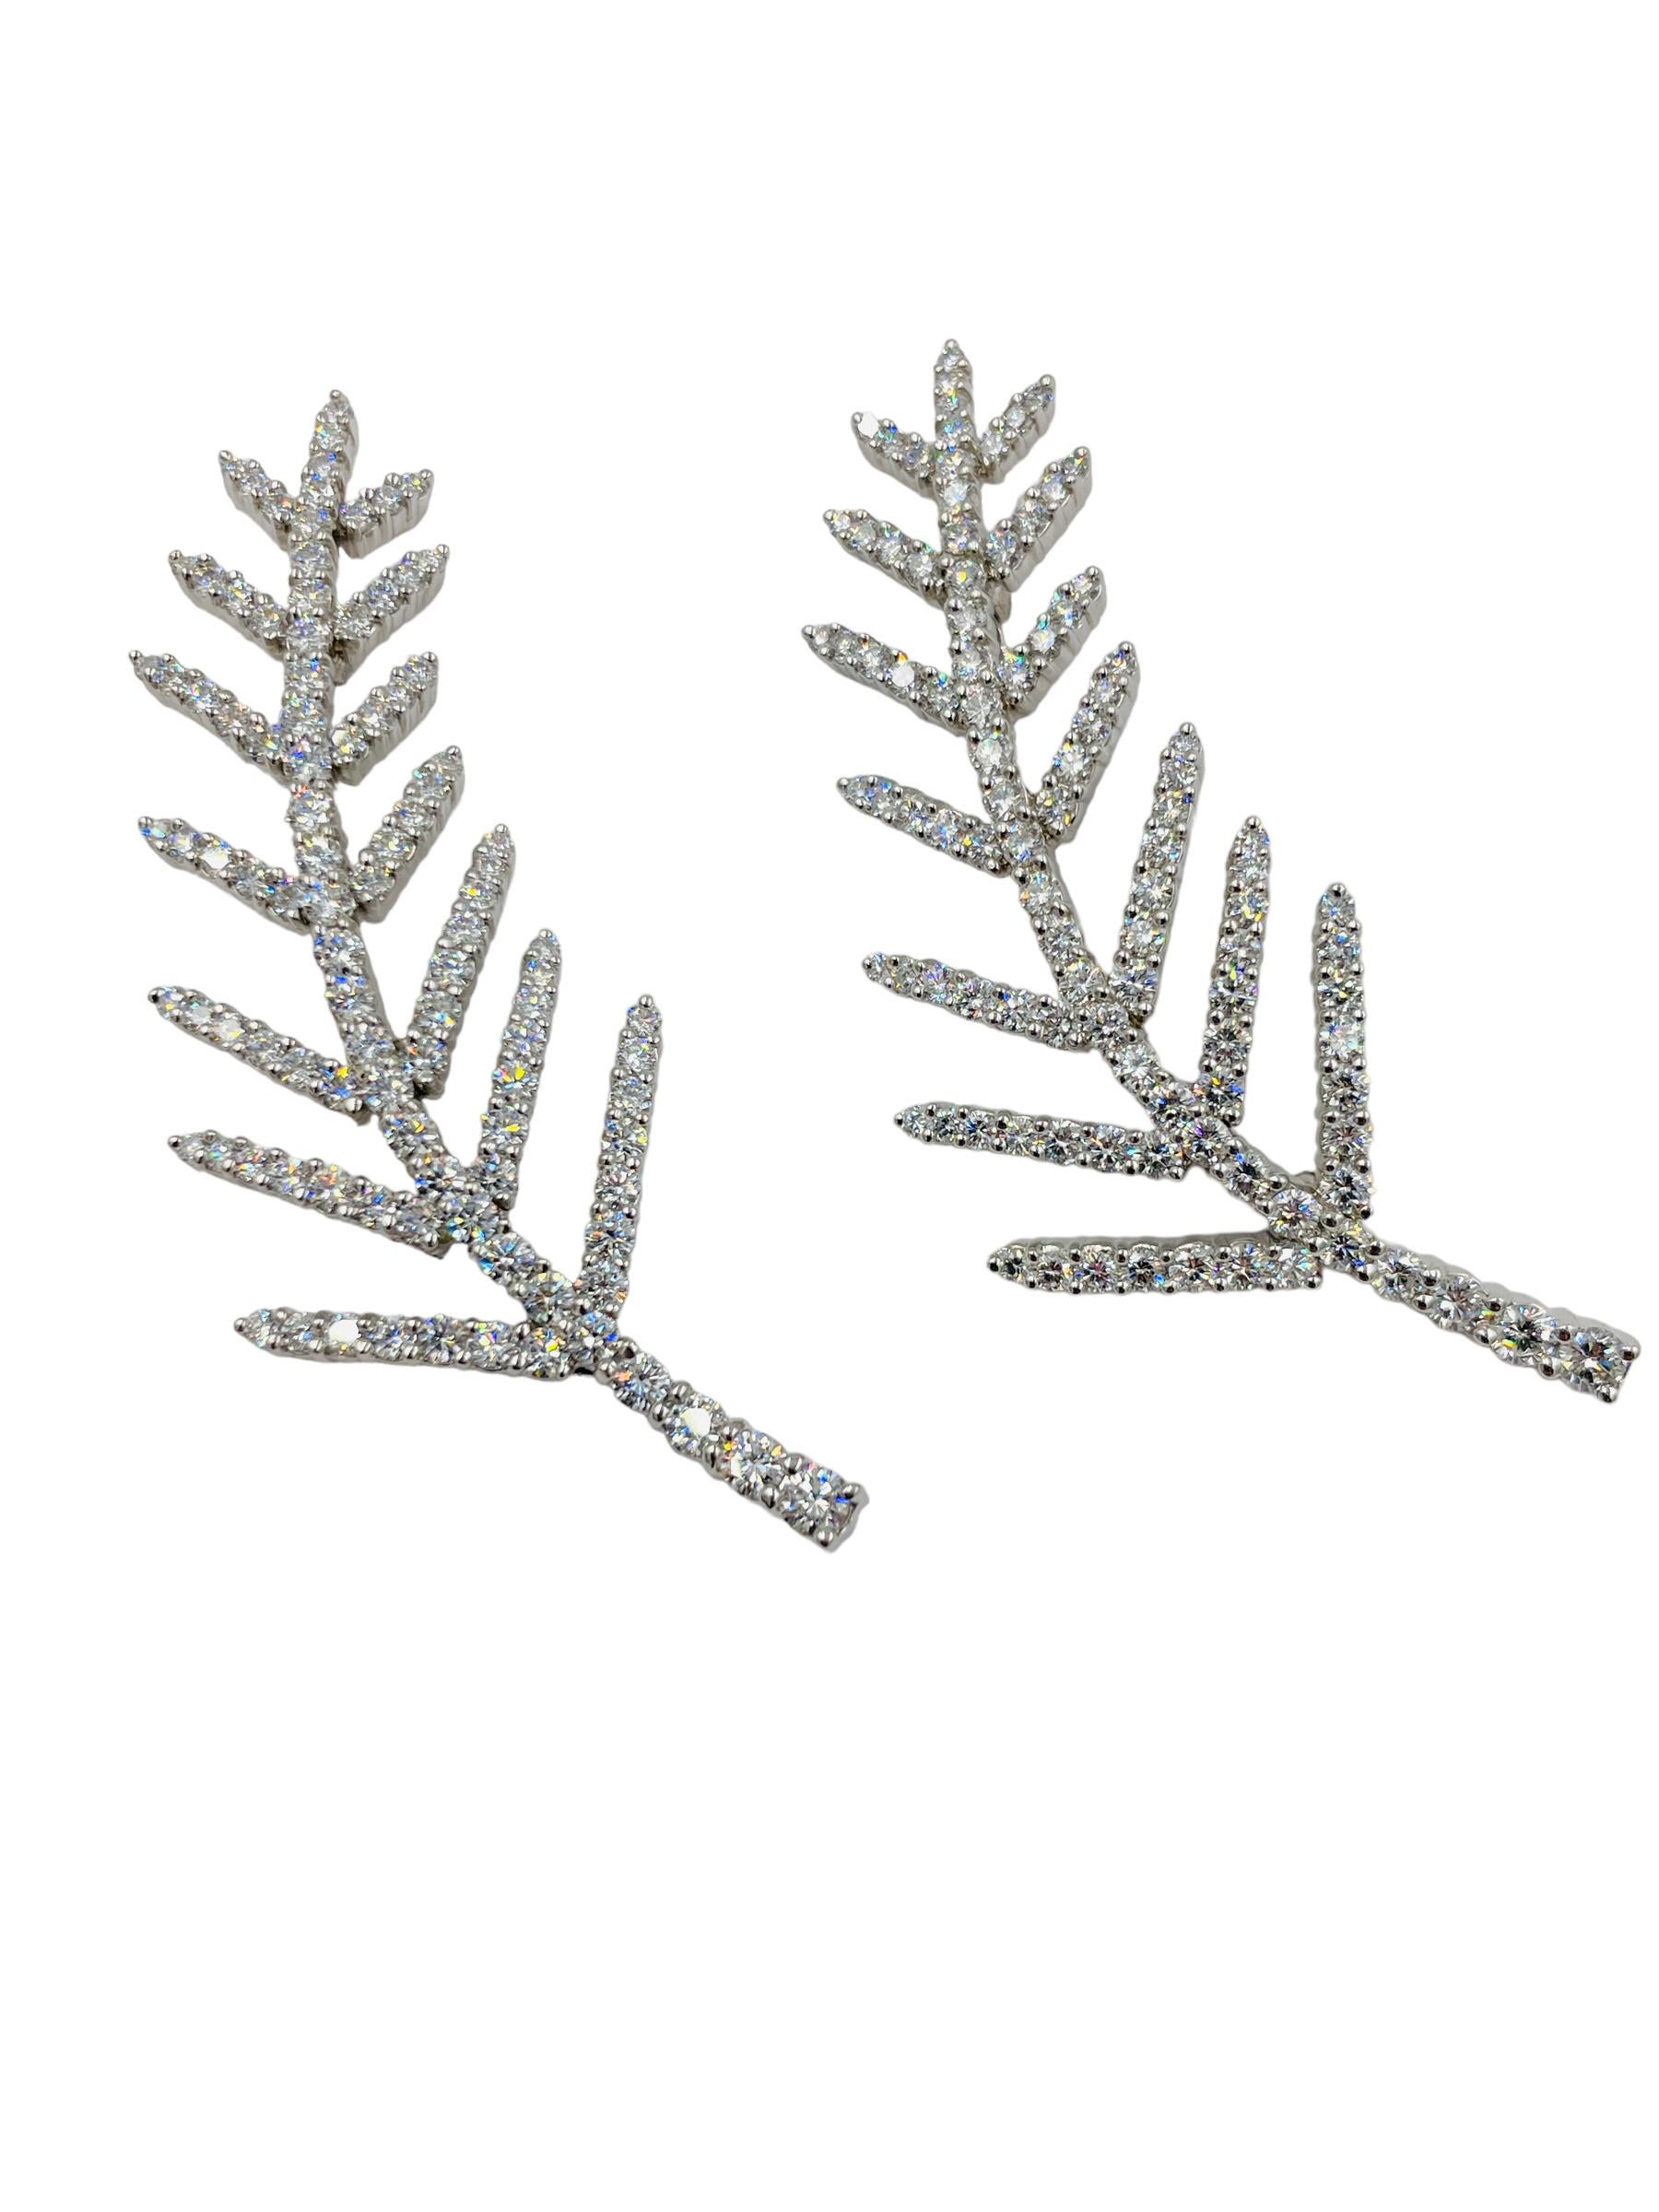 Pair of Tiffany diamond platinum brooches, from 1996. 
   A matching pair of fern diamond and platinum brooches, very intricate and very wearable.  

SPECIFICATION:

DIAMONDS:   Two hundred four round brilliant diamonds totaling approximately 7